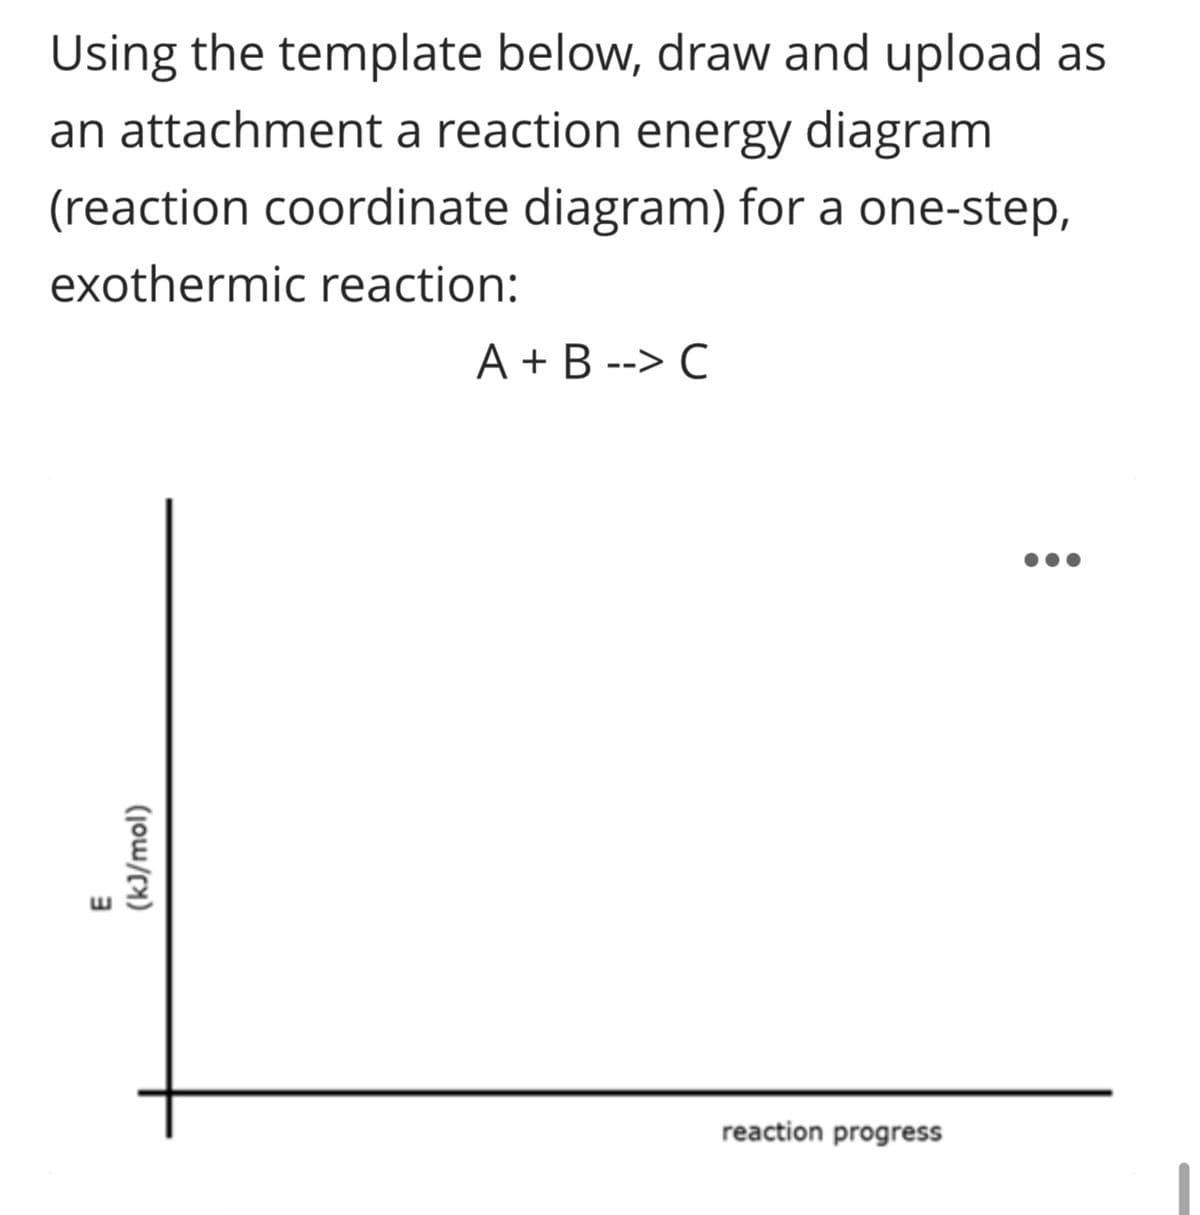 Using the template below, draw and upload as
an attachment a reaction energy diagram
(reaction coordinate diagram) for a one-step,
exothermic reaction:
(kJ/mol)
E
A + B --> C
reaction progress